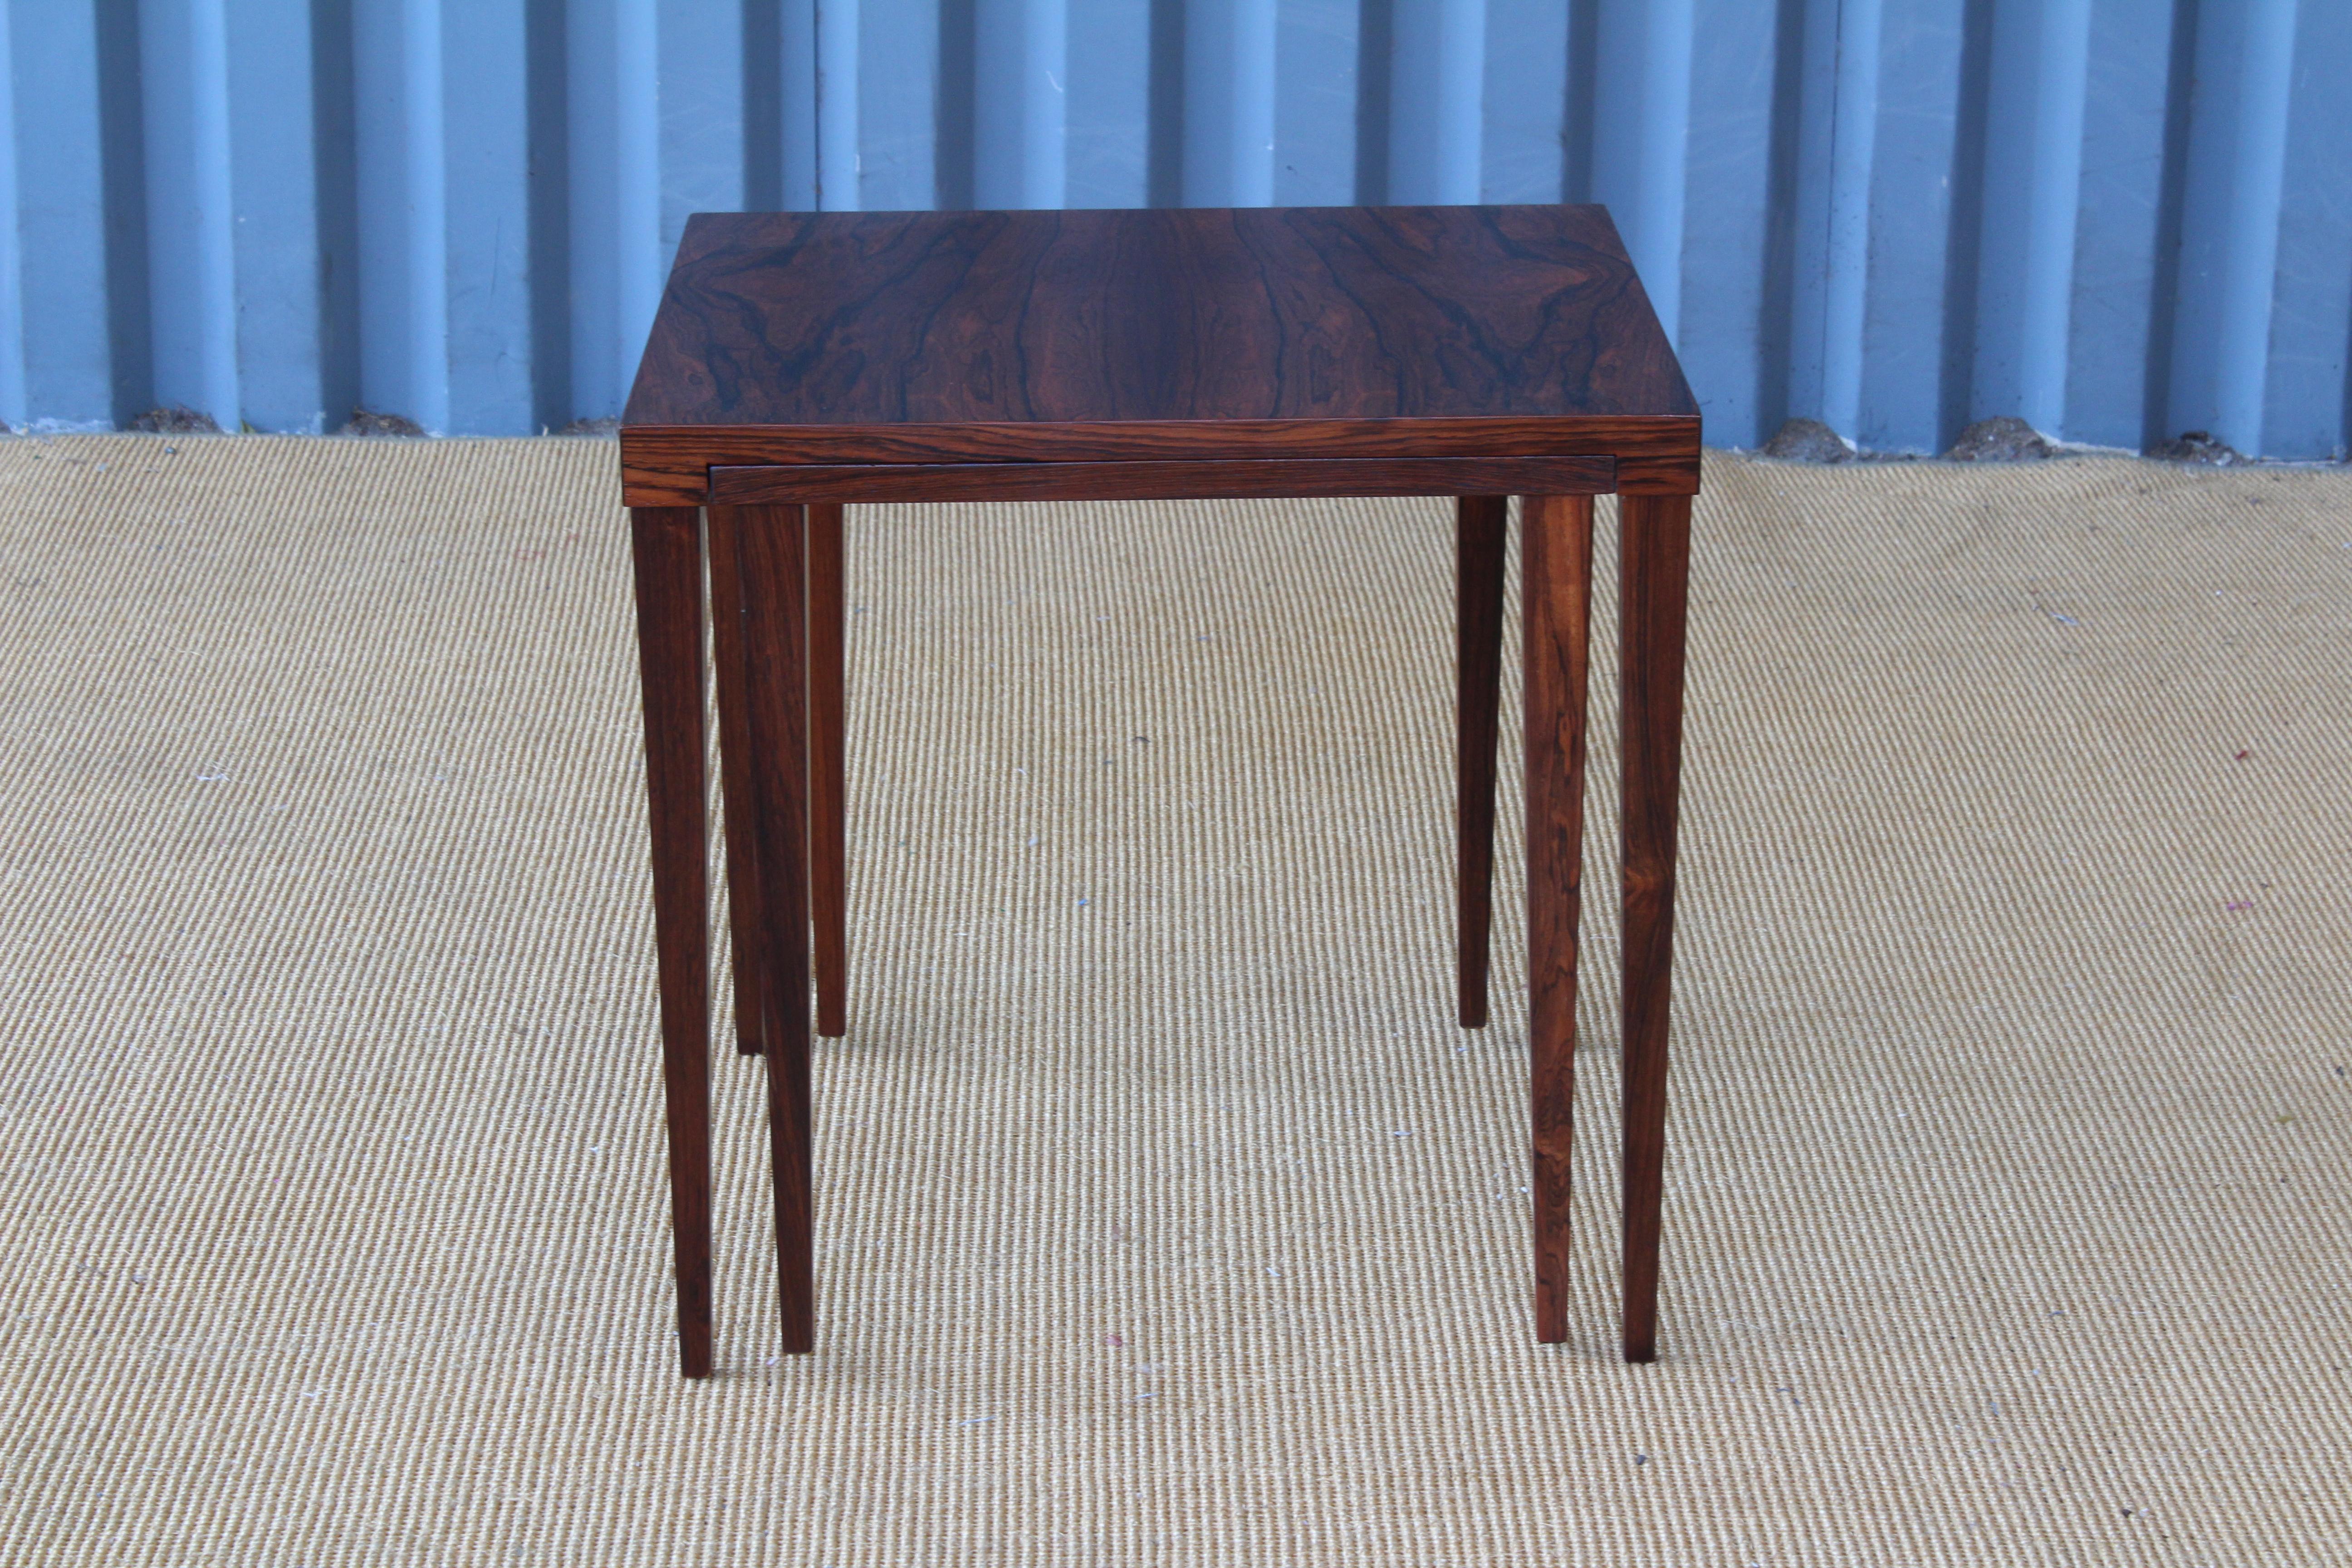 Pair of rosewood tables. Smaller table slides into the larger table. Both have been refinished and are in excellent condition. Marked underneath the smaller table.